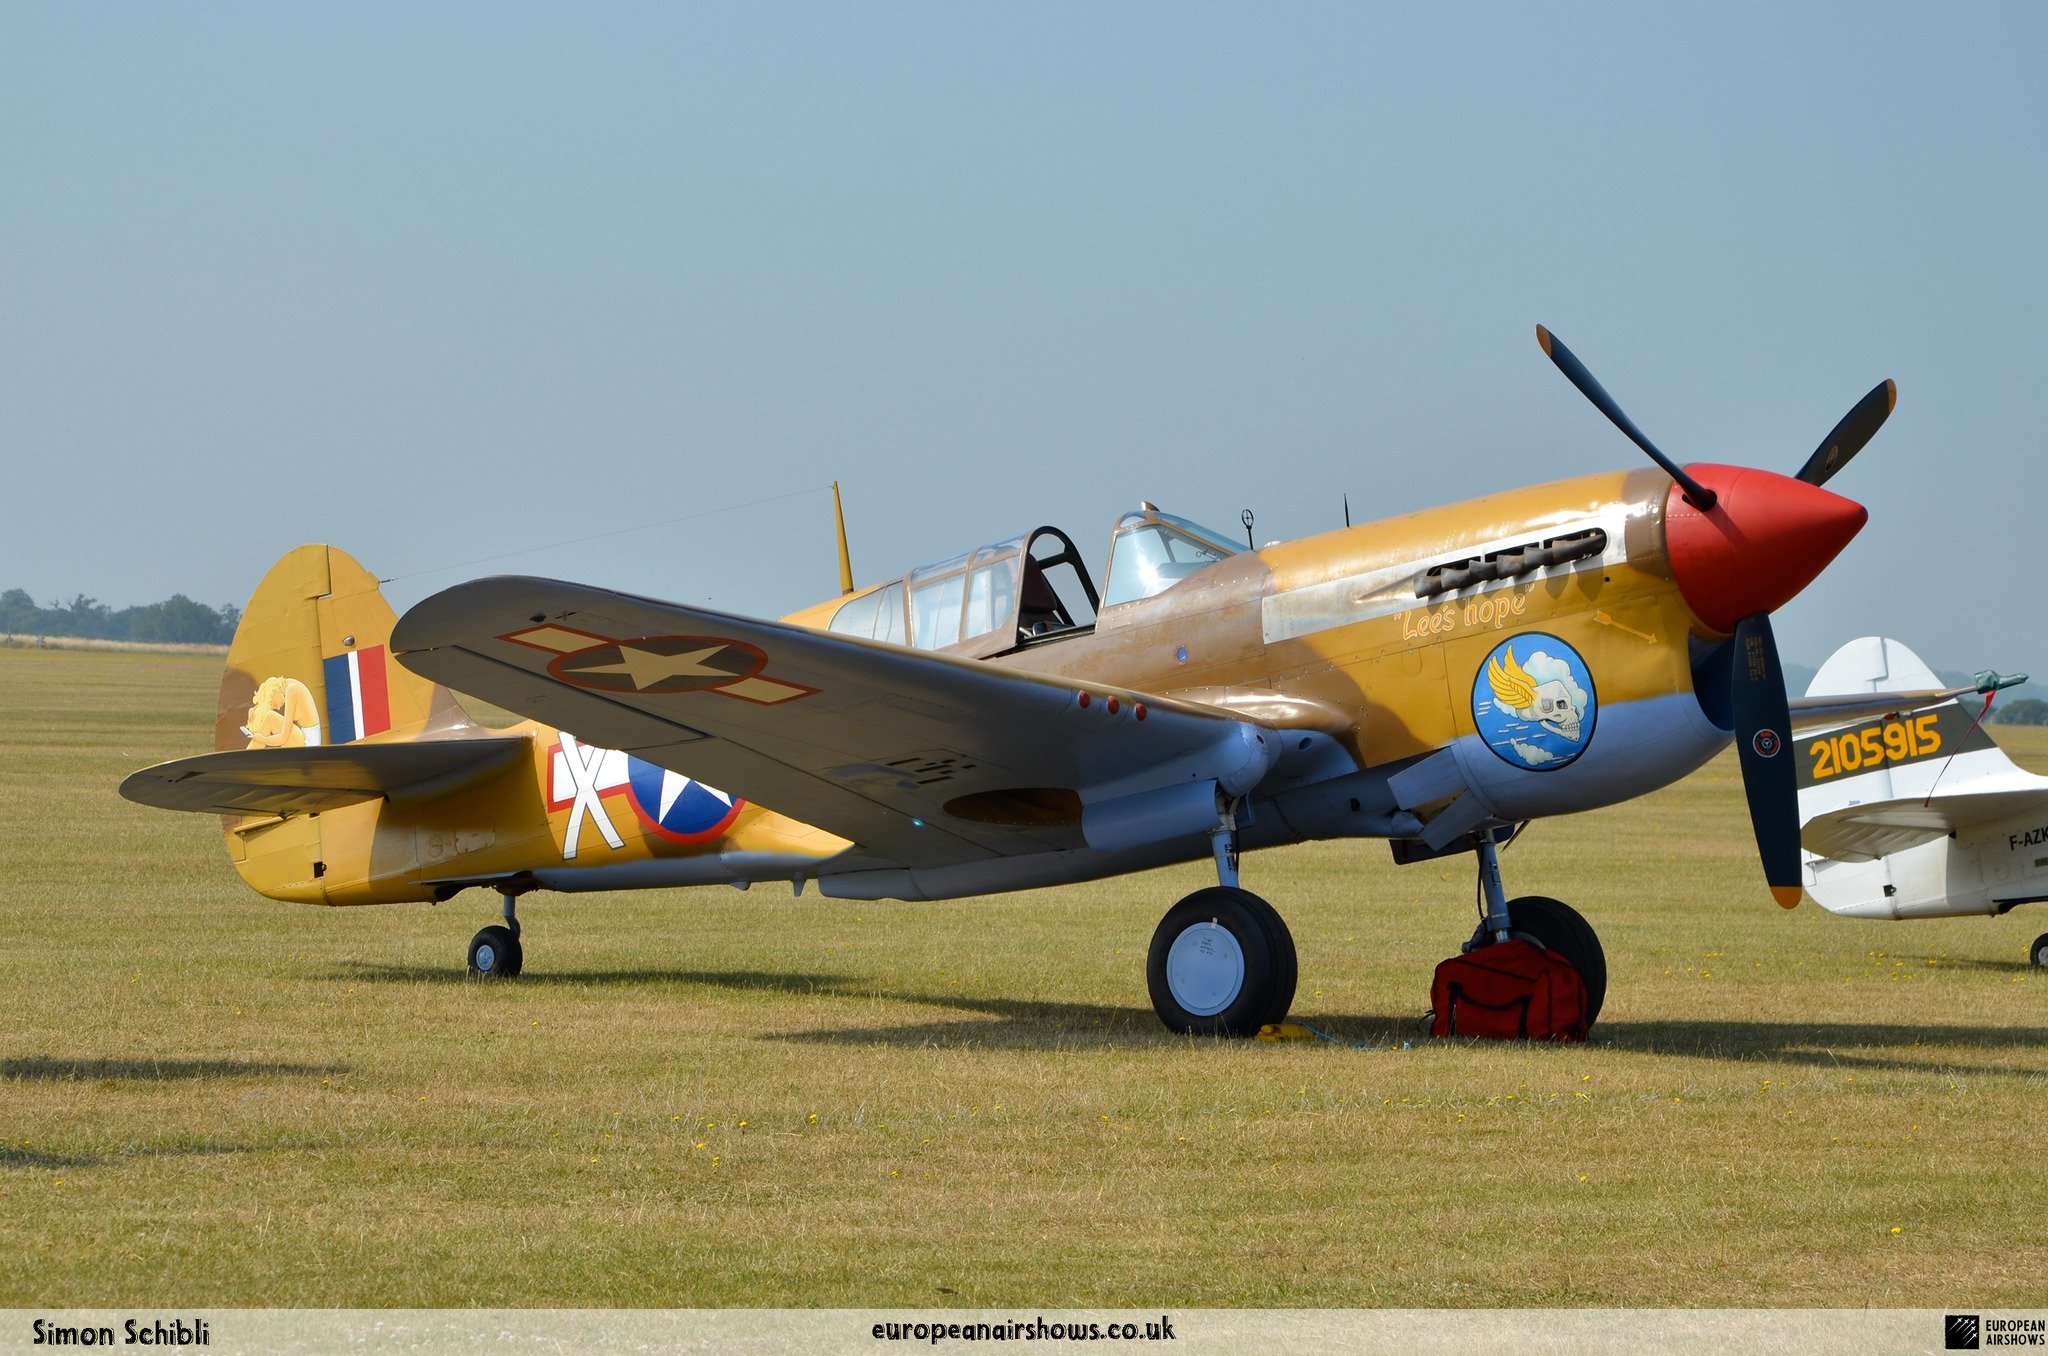 𝐀𝐈𝐑𝐒𝐇𝐎𝐖 𝐍𝐄𝐖𝐒: Curtiss P-40F Warhawk 'Lee's Hope' from the Fighter Collection joins the La Fert&eacute;-Alais Meeting A&eacute;rien: Le Temps des H&eacute;lices 2024 line up.

➖➖➖➖➖➖➖➖➖➖➖
🔽CHECK OUT 🔽
europeanairshows.co.uk
facebook.com/E